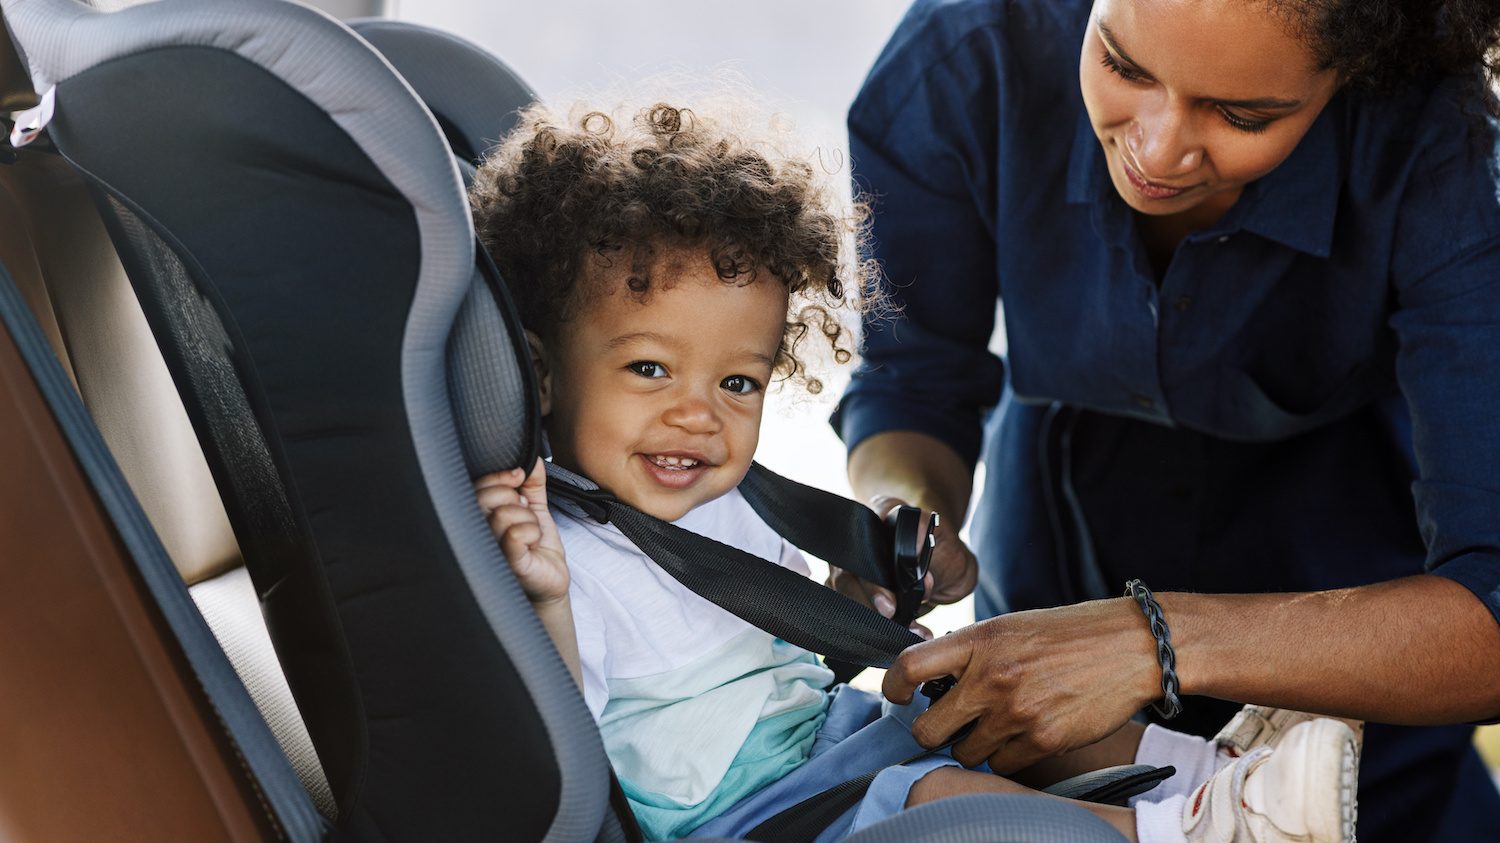 Free Car Seats Are Available To Some, Where Can I Get A Free Car Seat For My Newborn